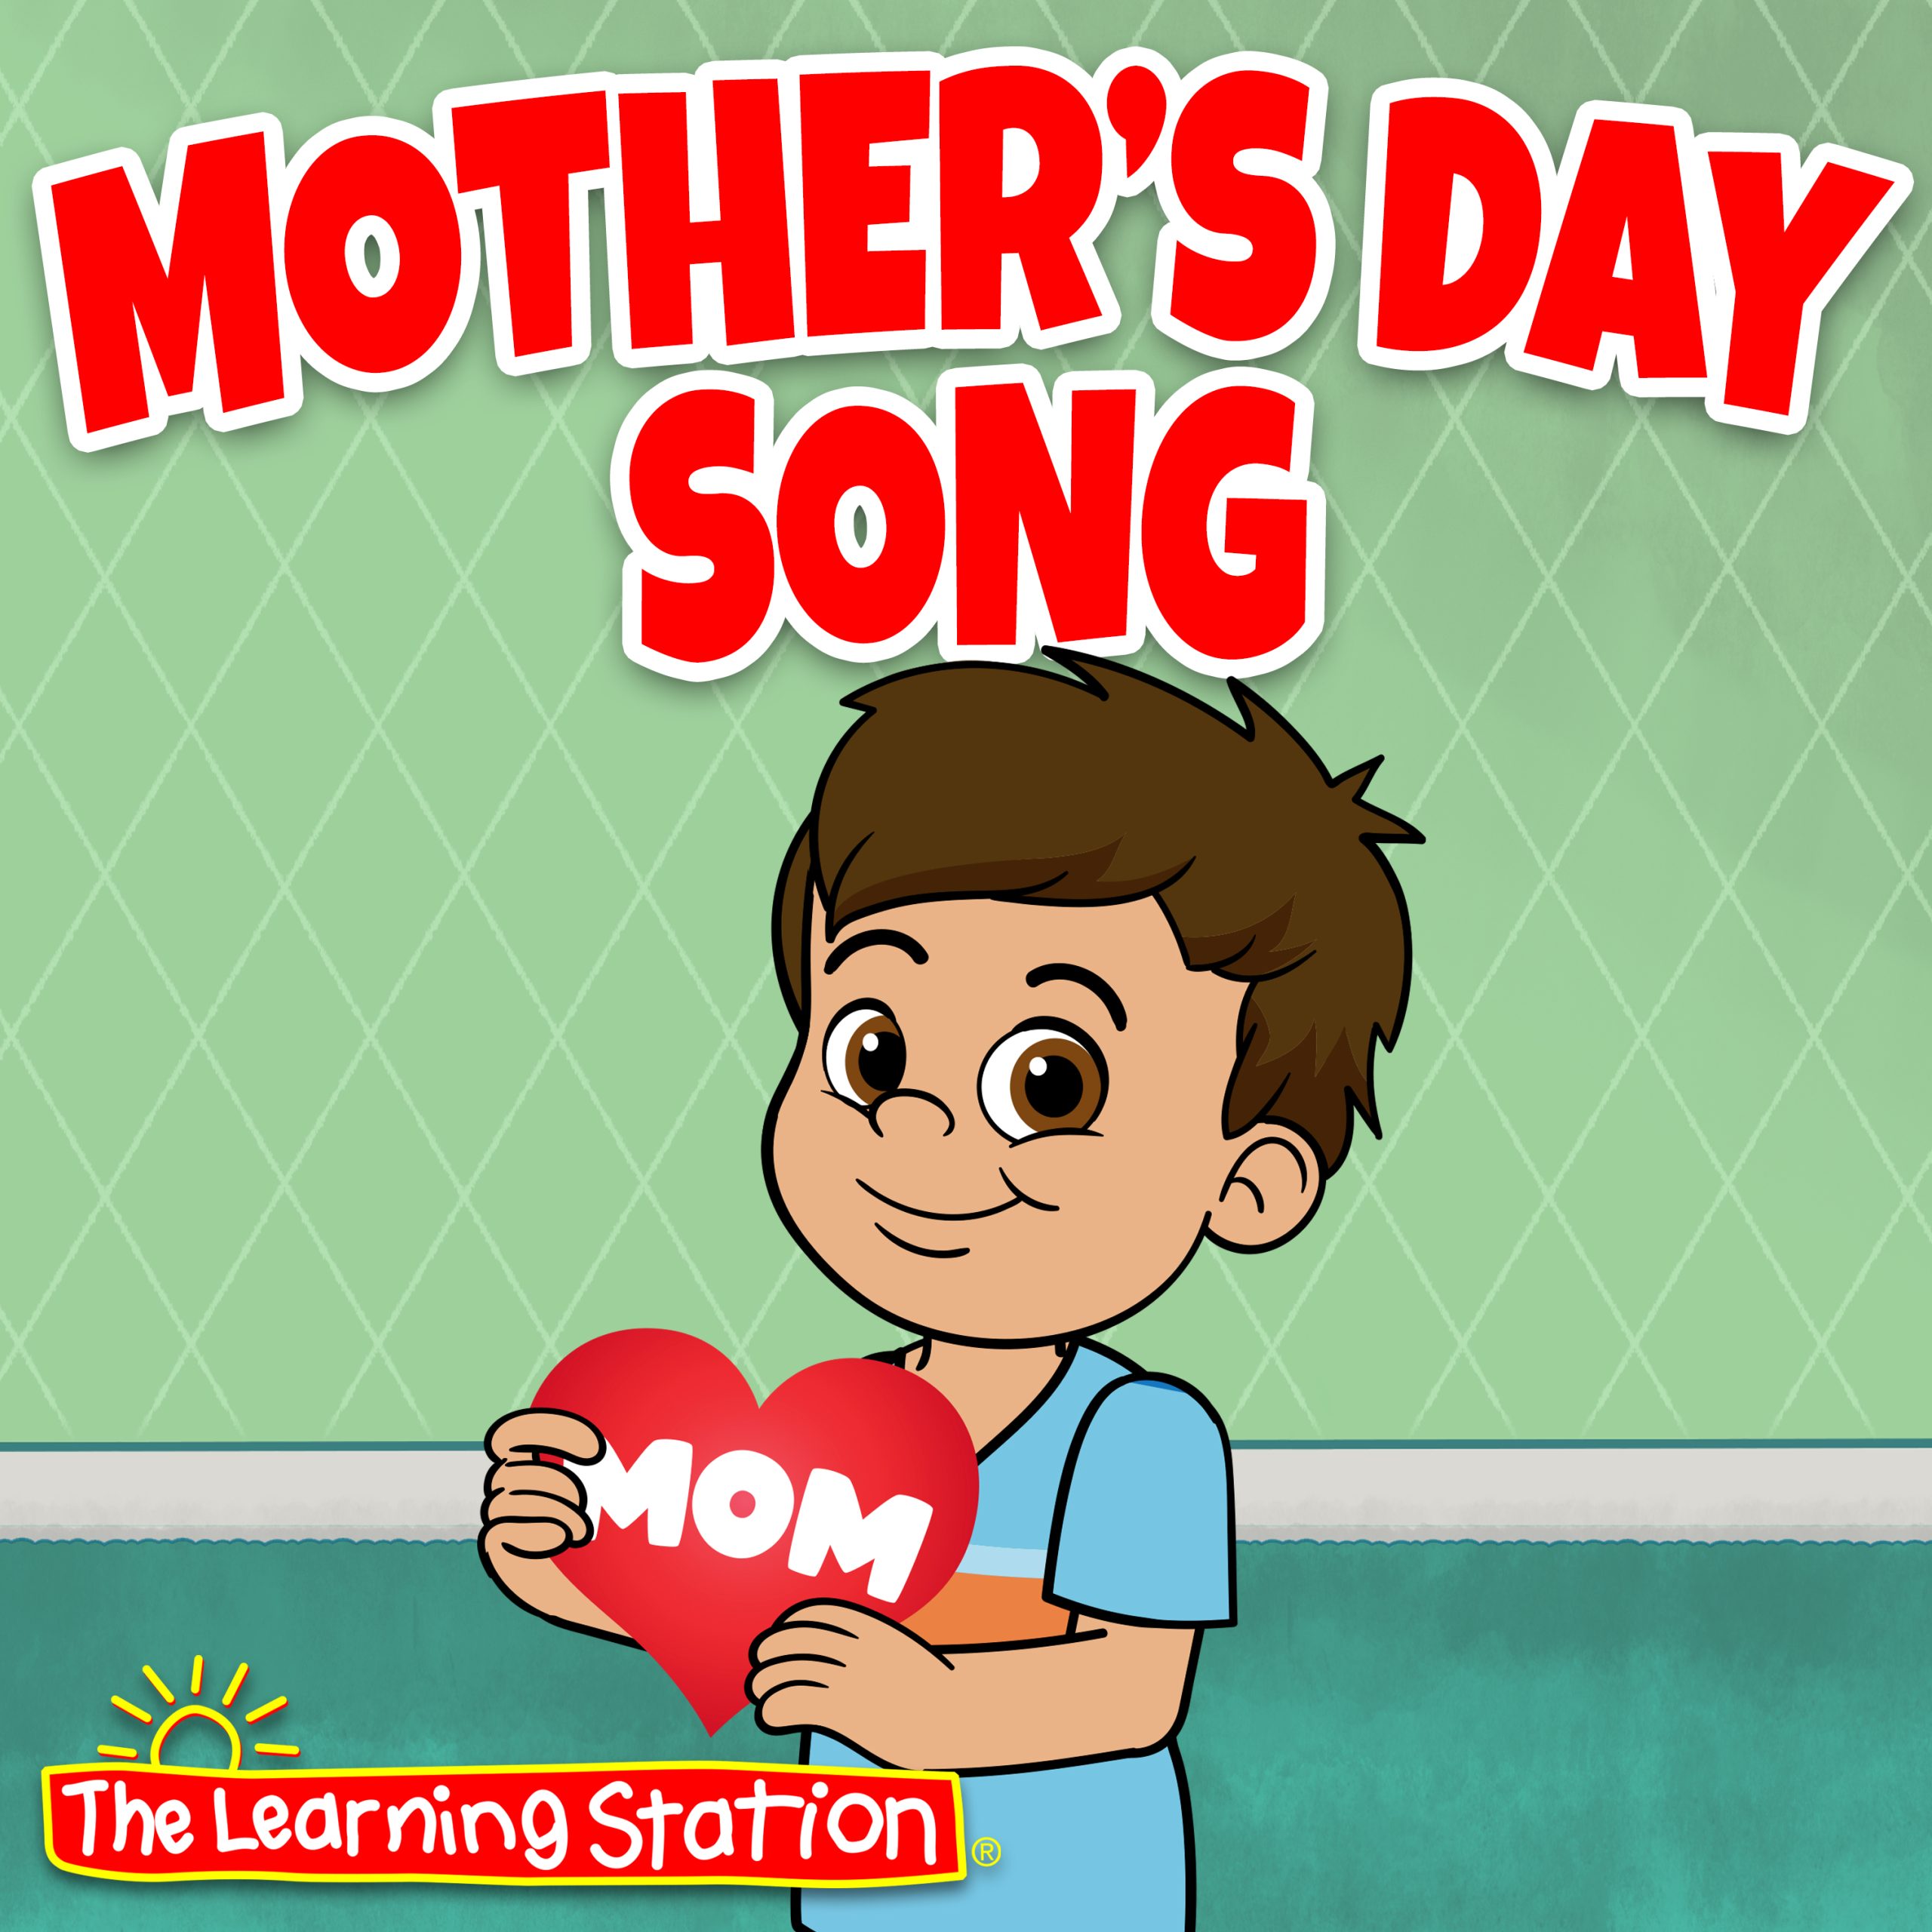 mother-s-day-song-the-learning-station